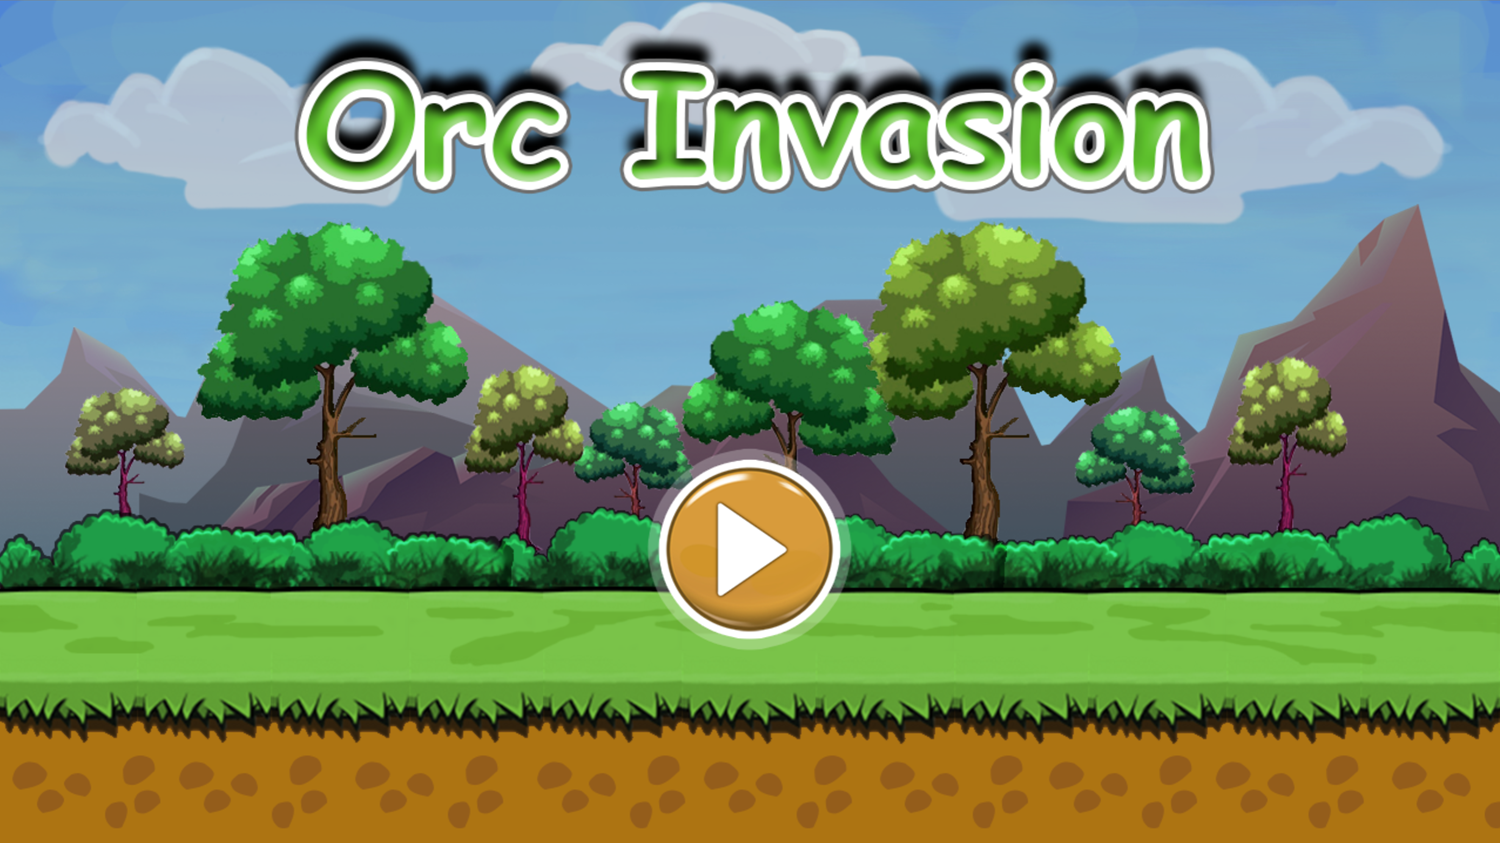 Orc Invasion Game Welcome Screen Screenshot.